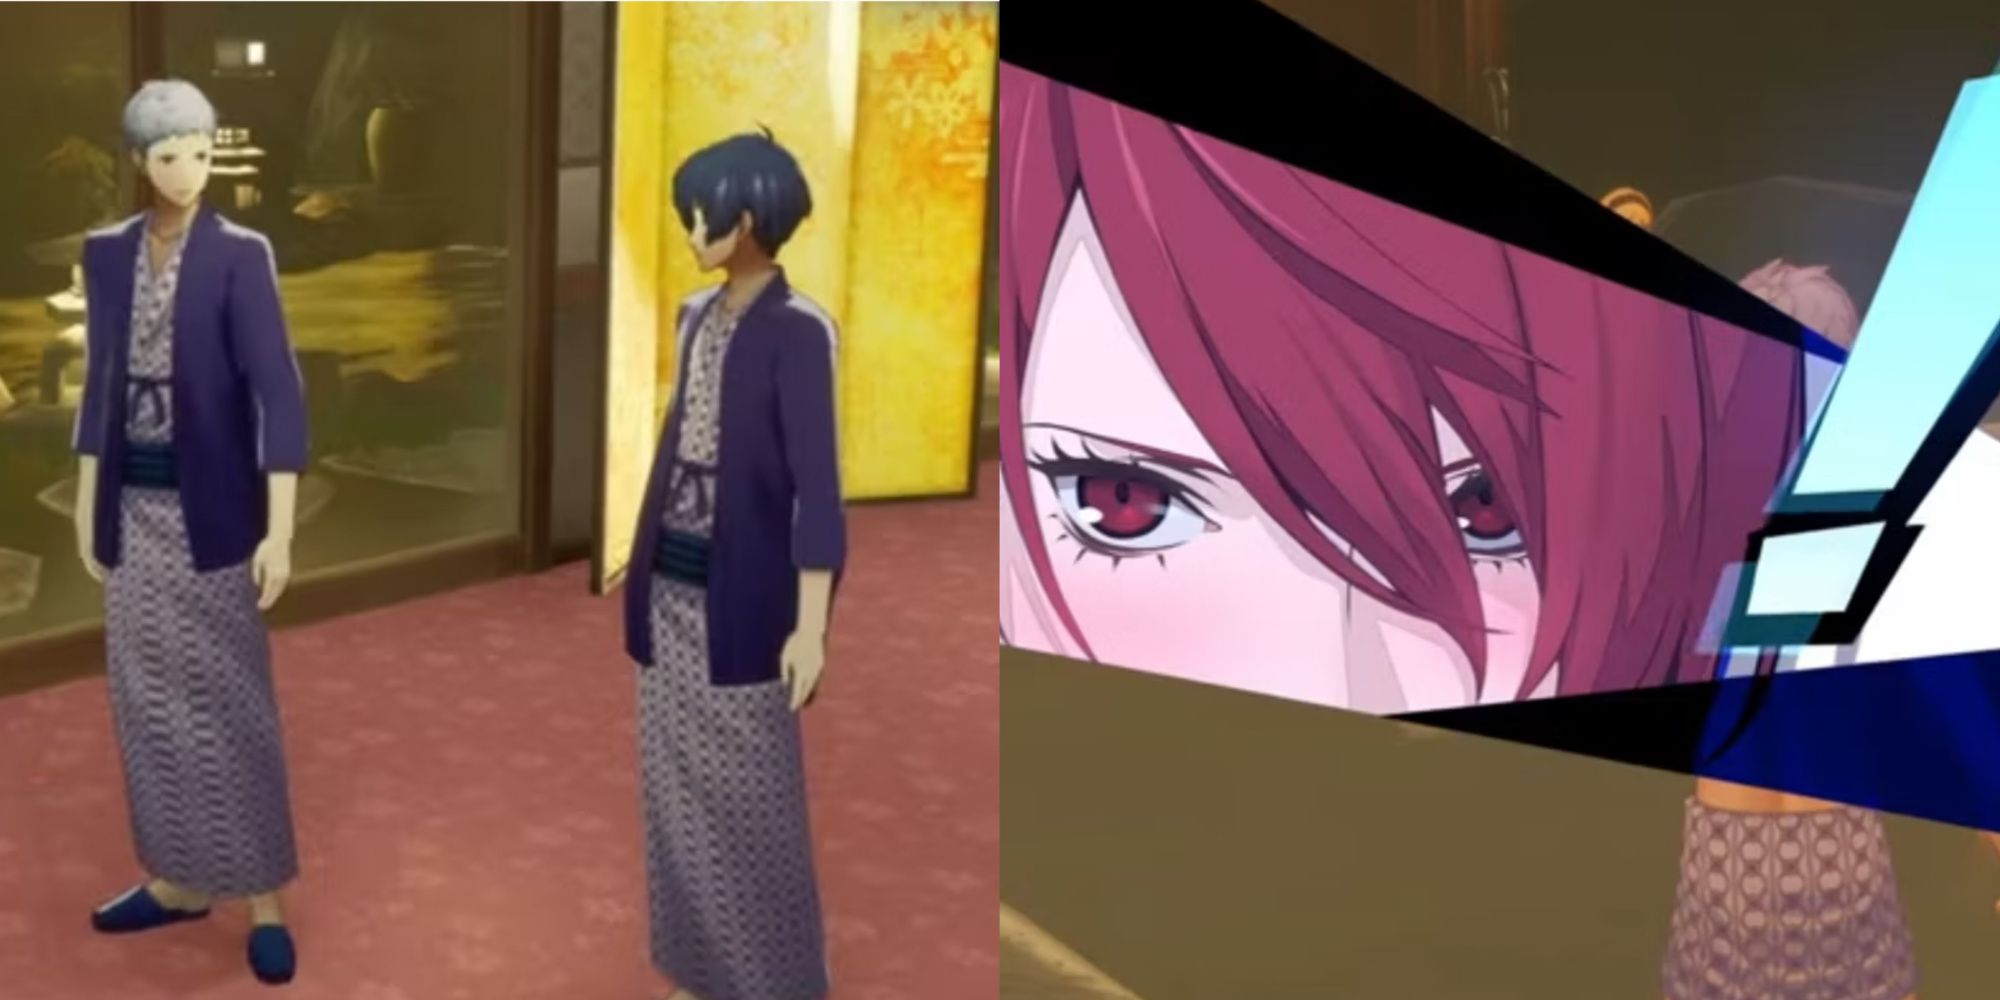 A collage showing two characters speaking to each other on the left and a promp with an exclamation mark and Mitsuru's face on the right.